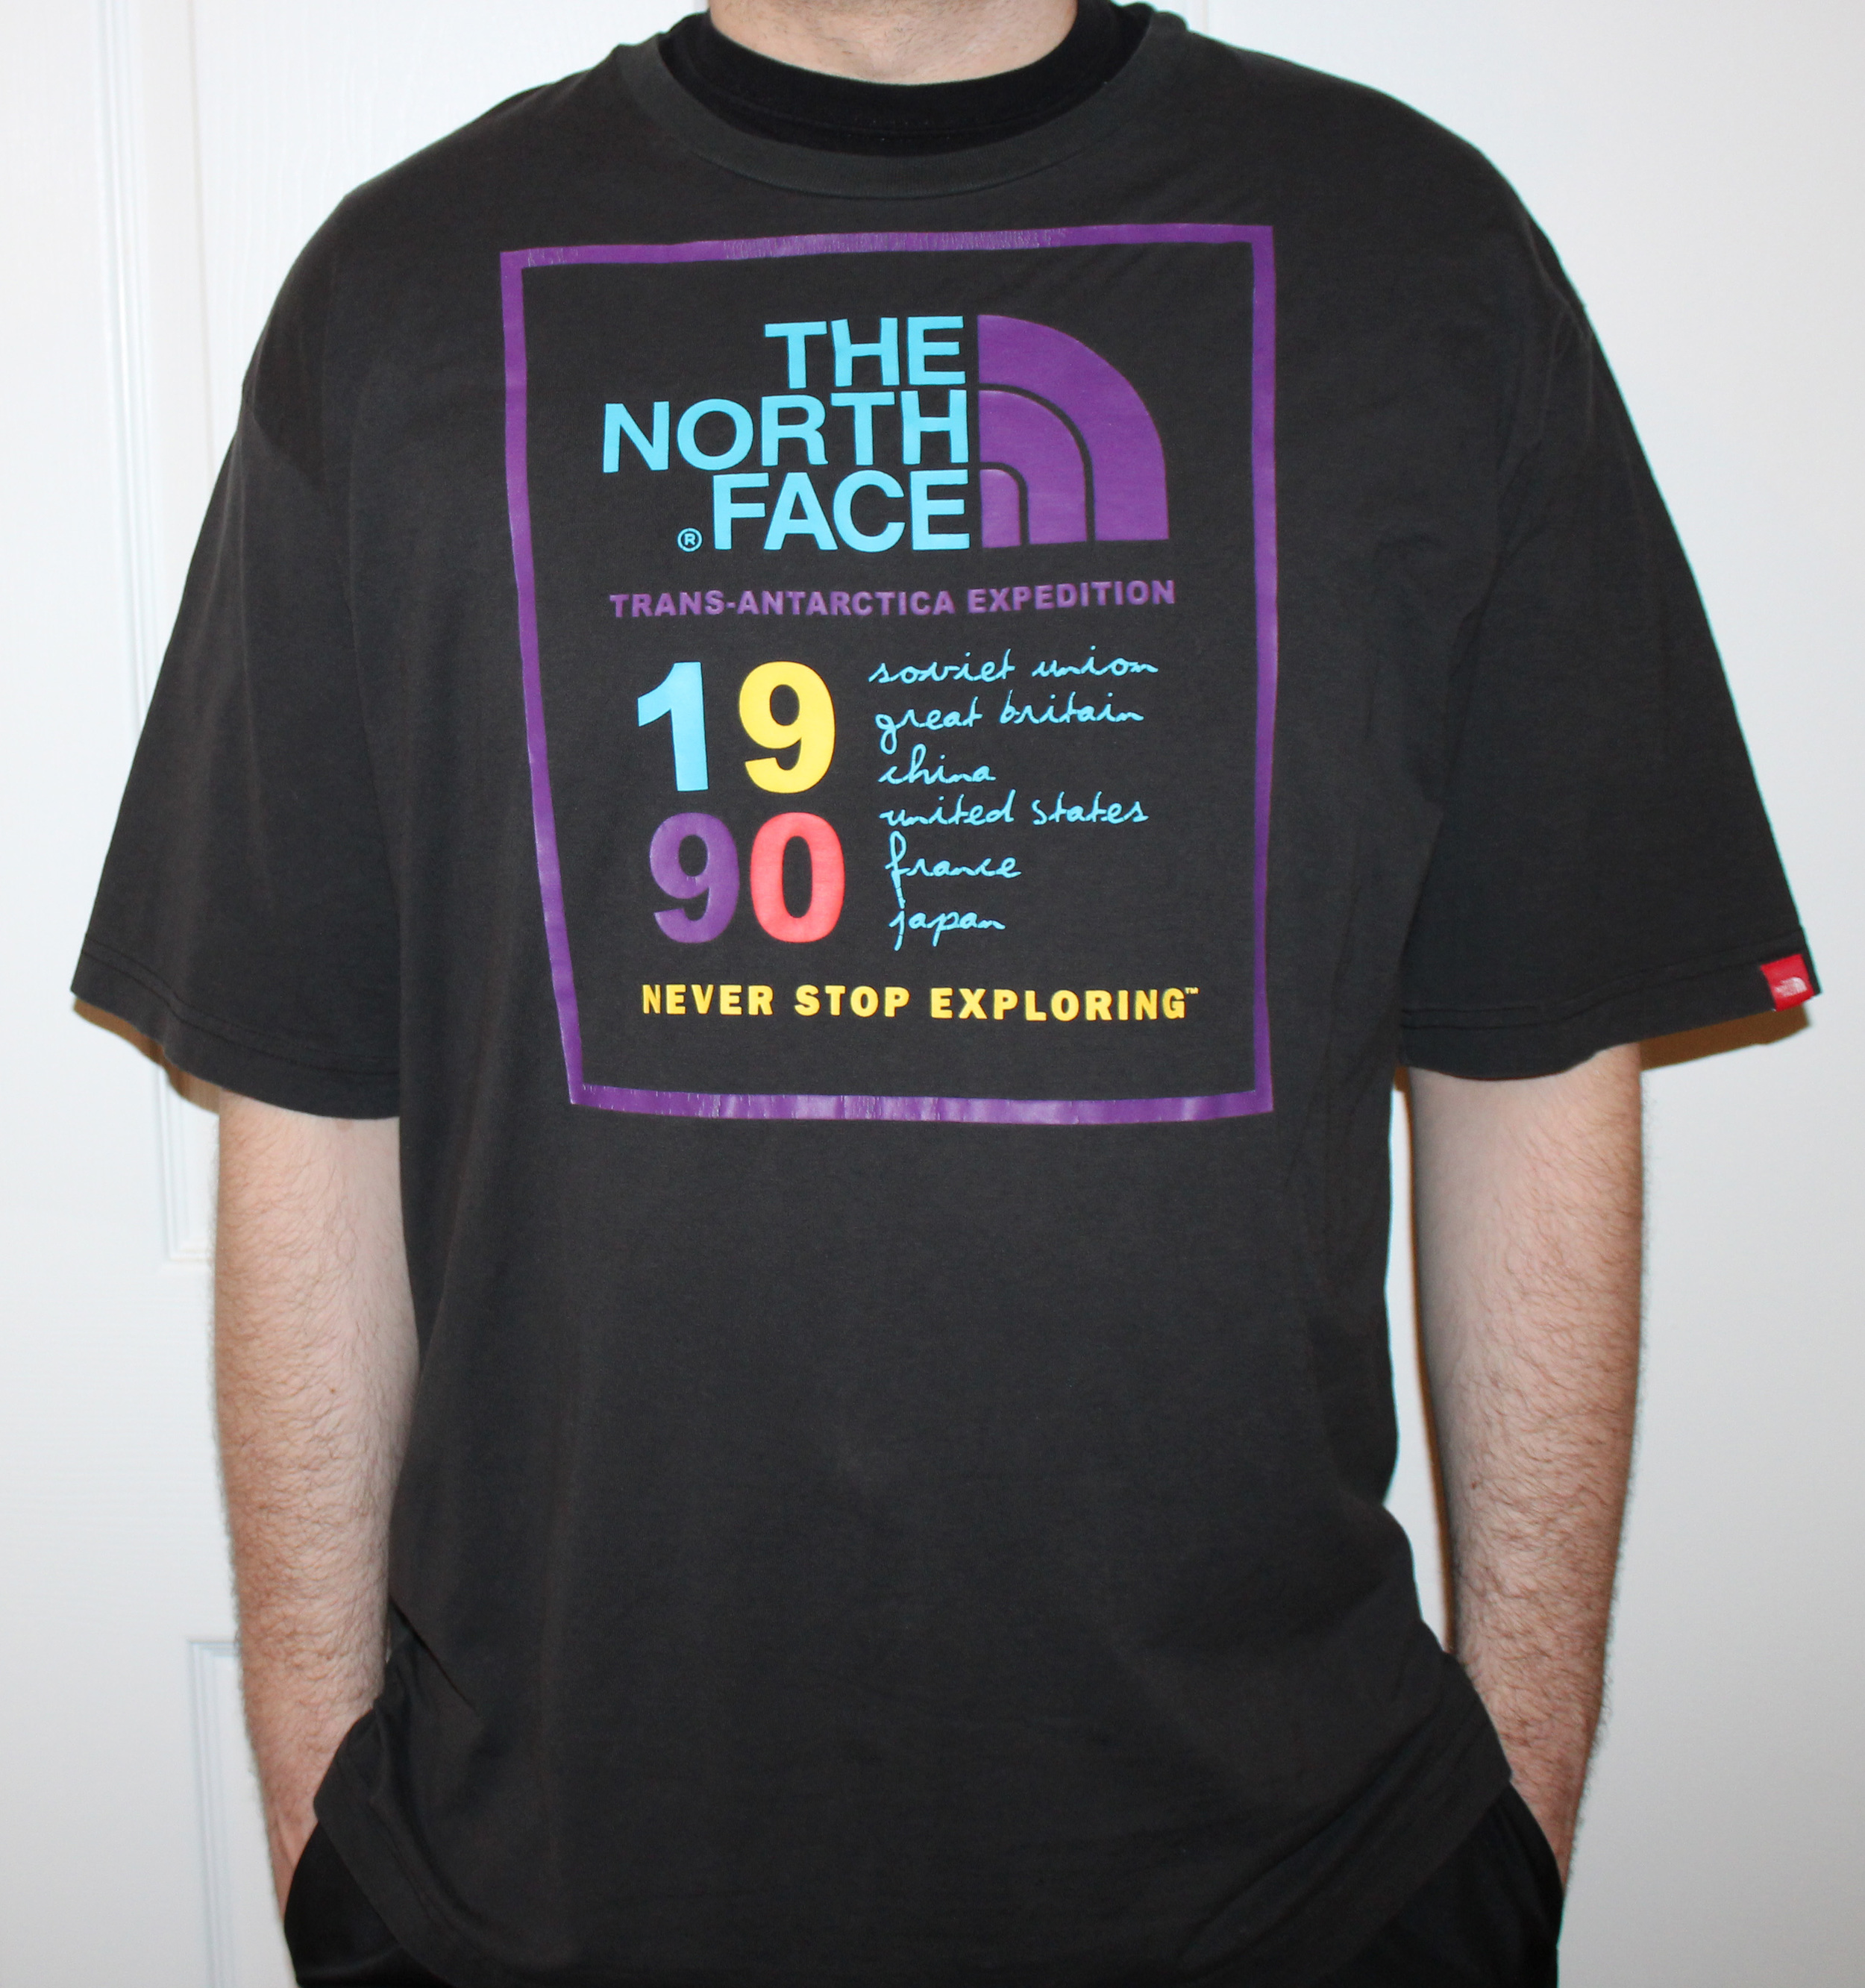 The North Face Trans-Antarctica Expedition T Shirt (Size XXL